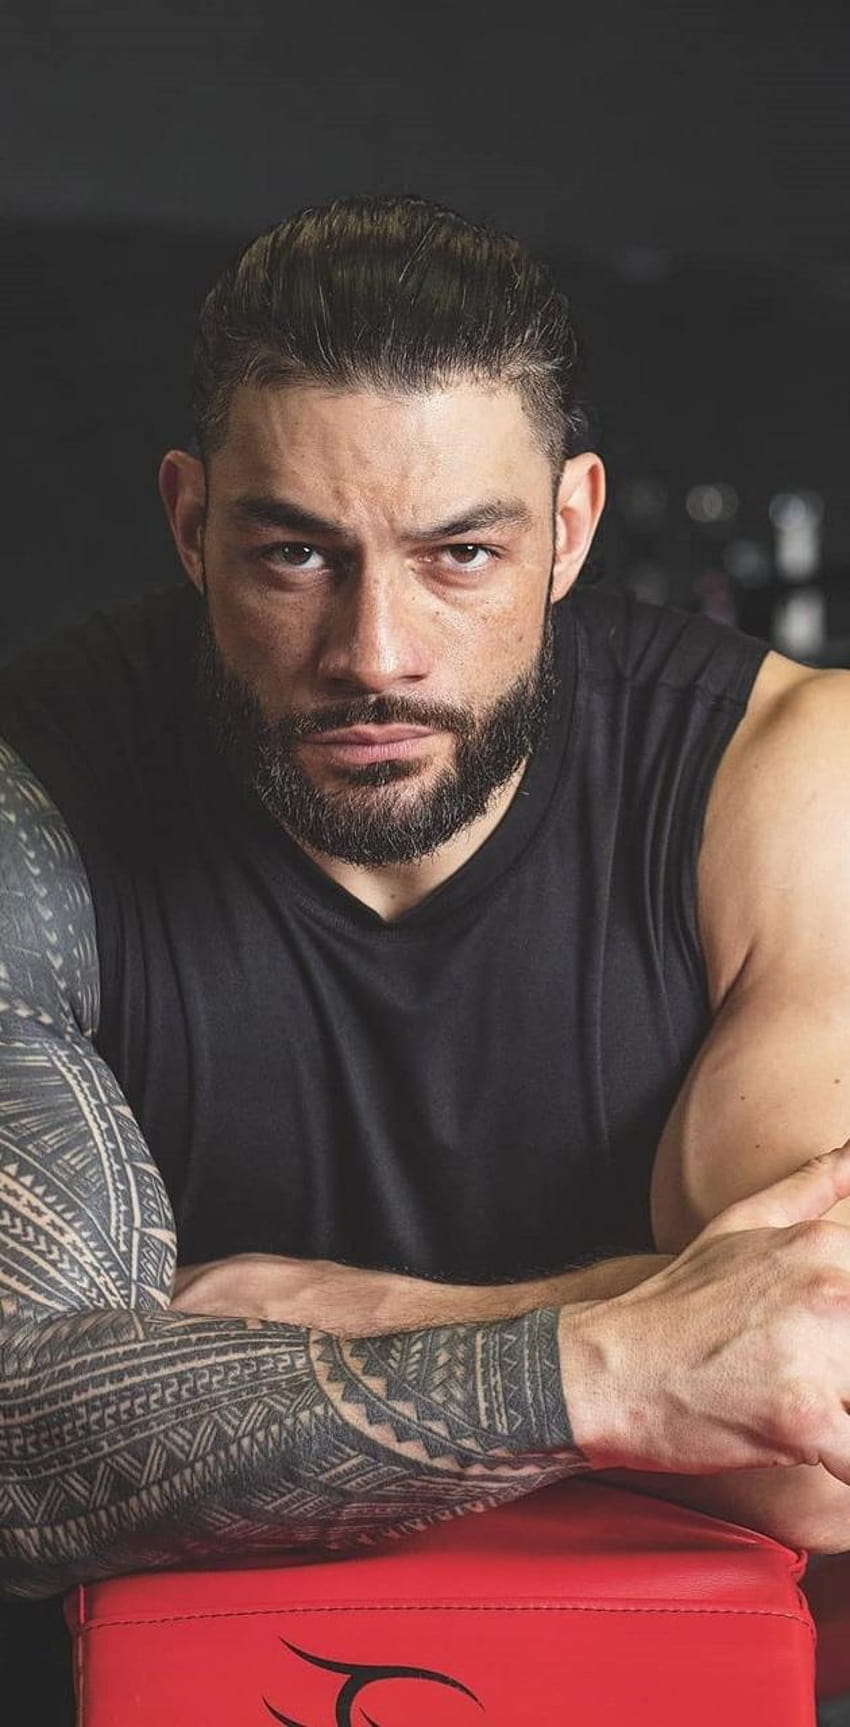 Samoa Observer | Roman Reigns shares stories behind his body art